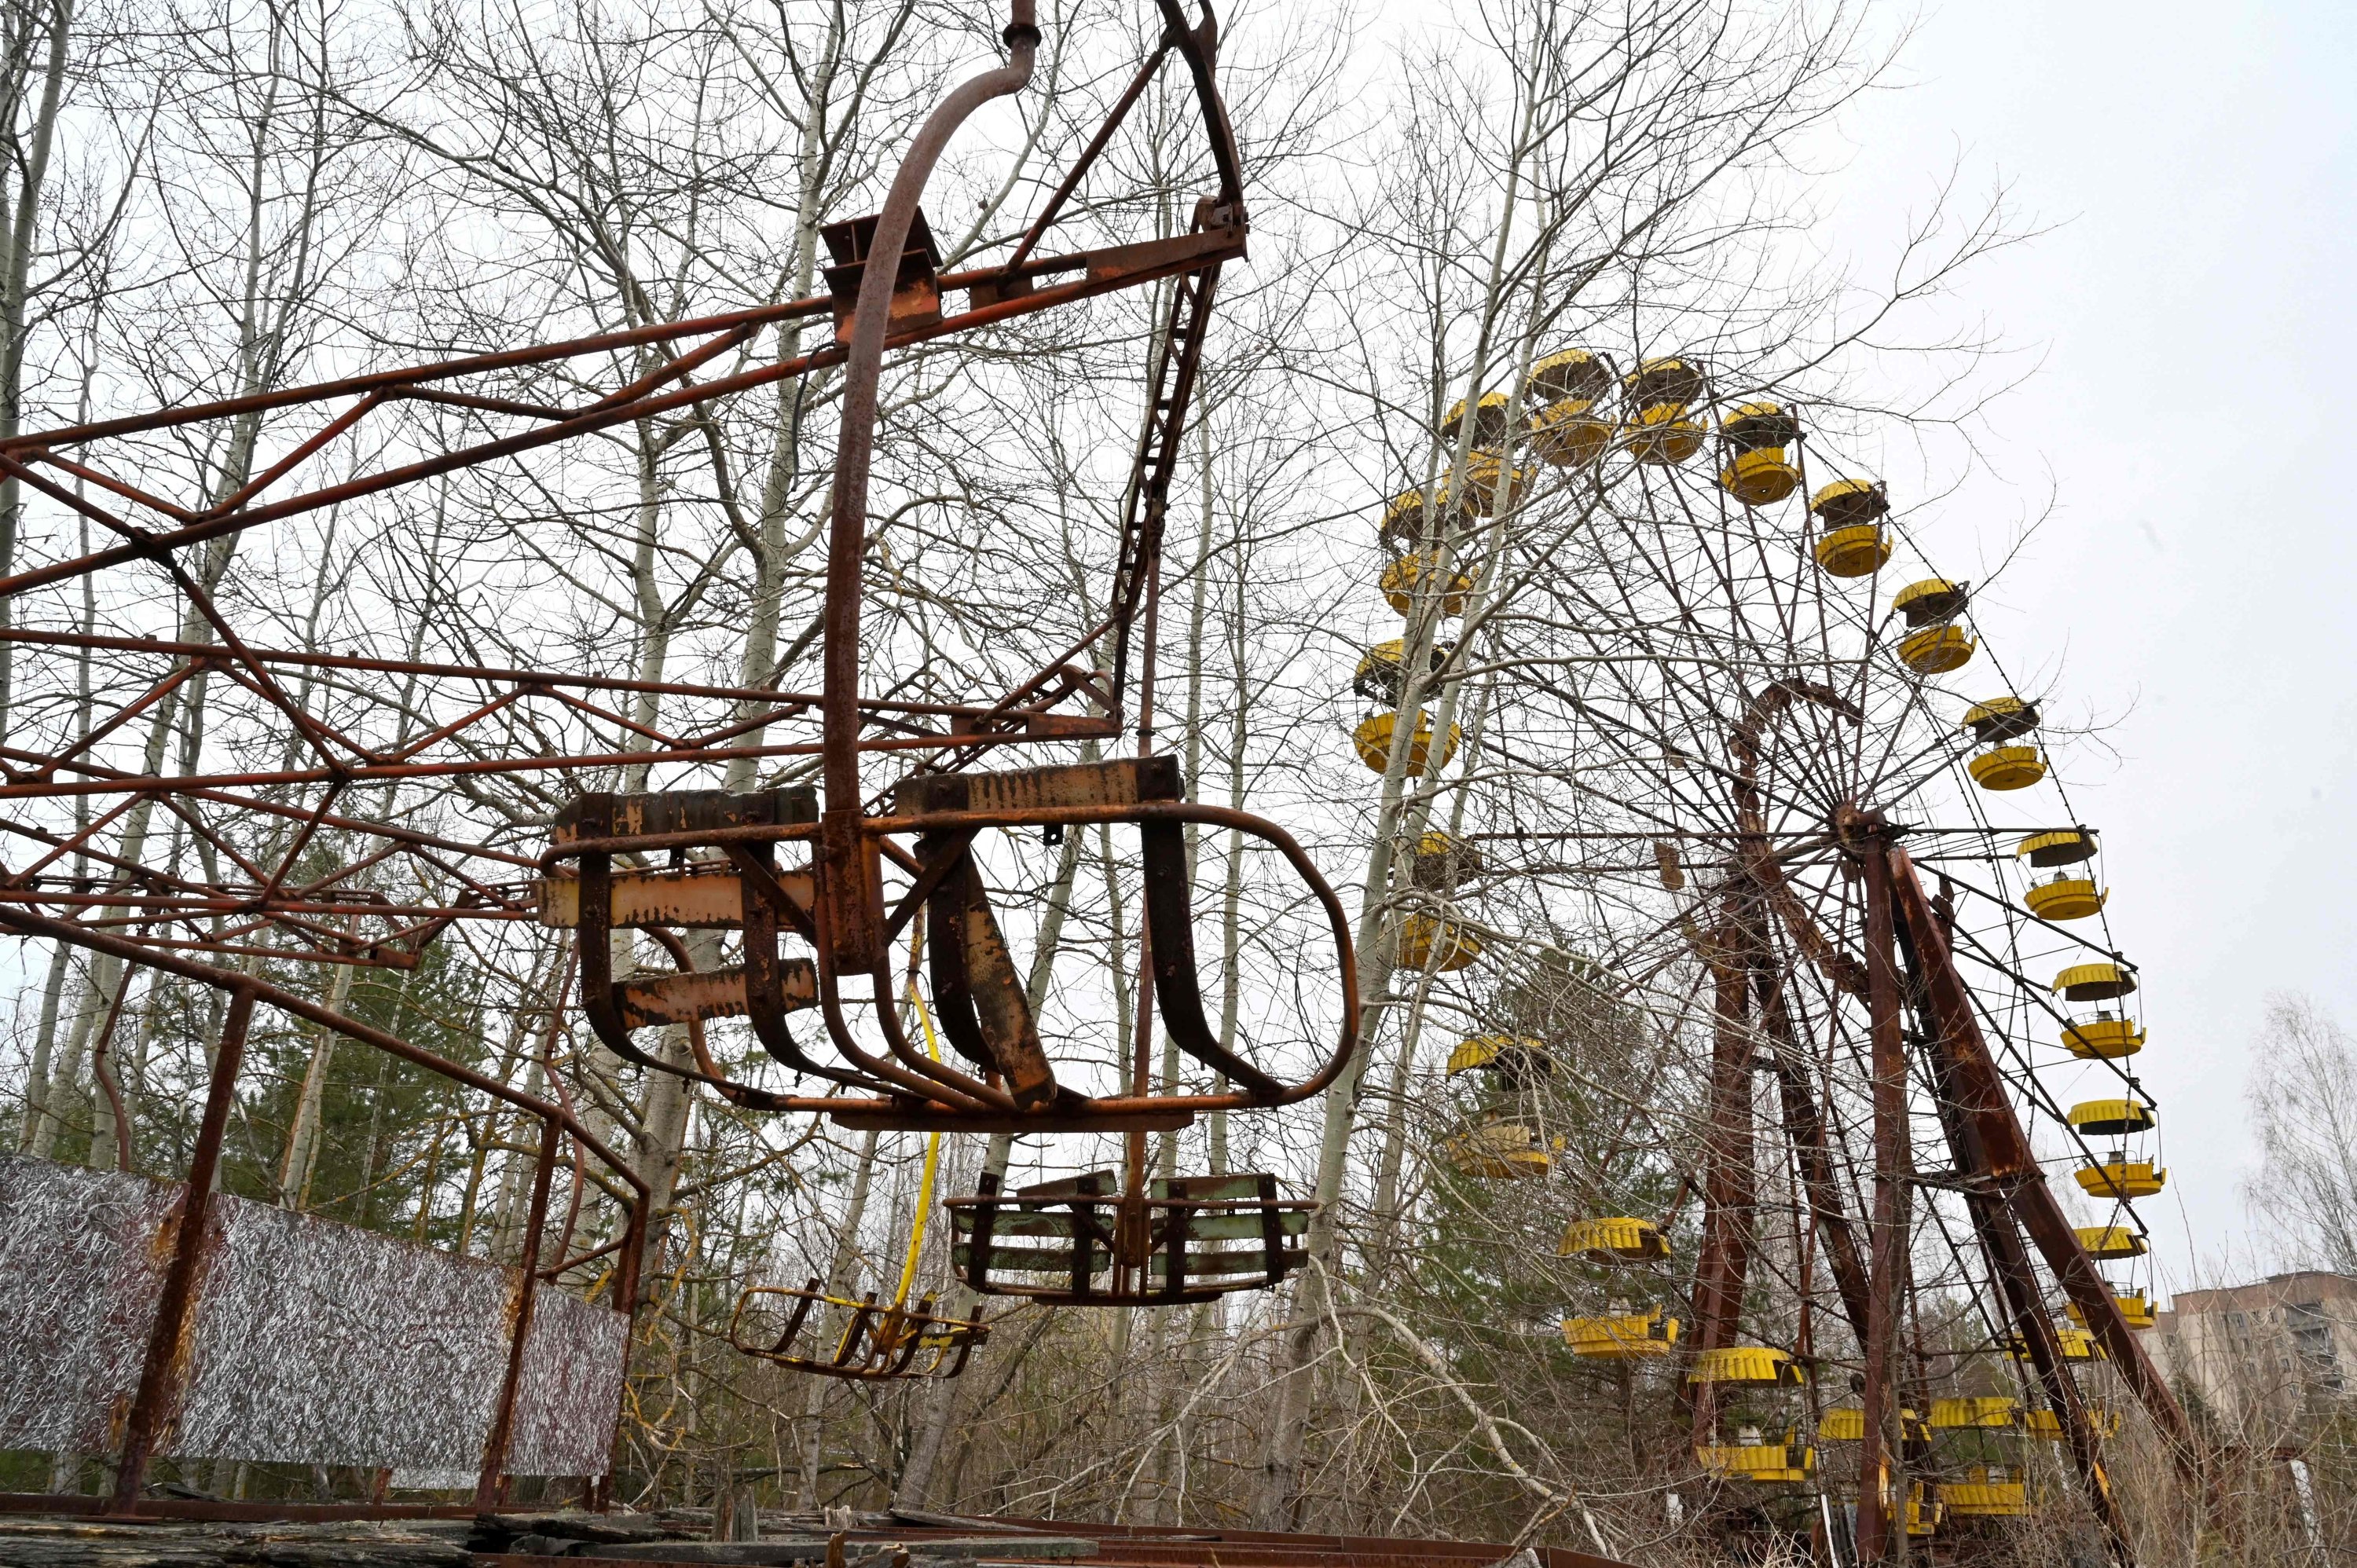 A Ferris wheel in an abandoned amusement park near the Chernobyl Nuclear Power Plant ahead of the upcoming 35th anniversary of the Chernobyl nuclear disaster, Pripyat, Ukraine, April 13, 2021. (AFP Photo)